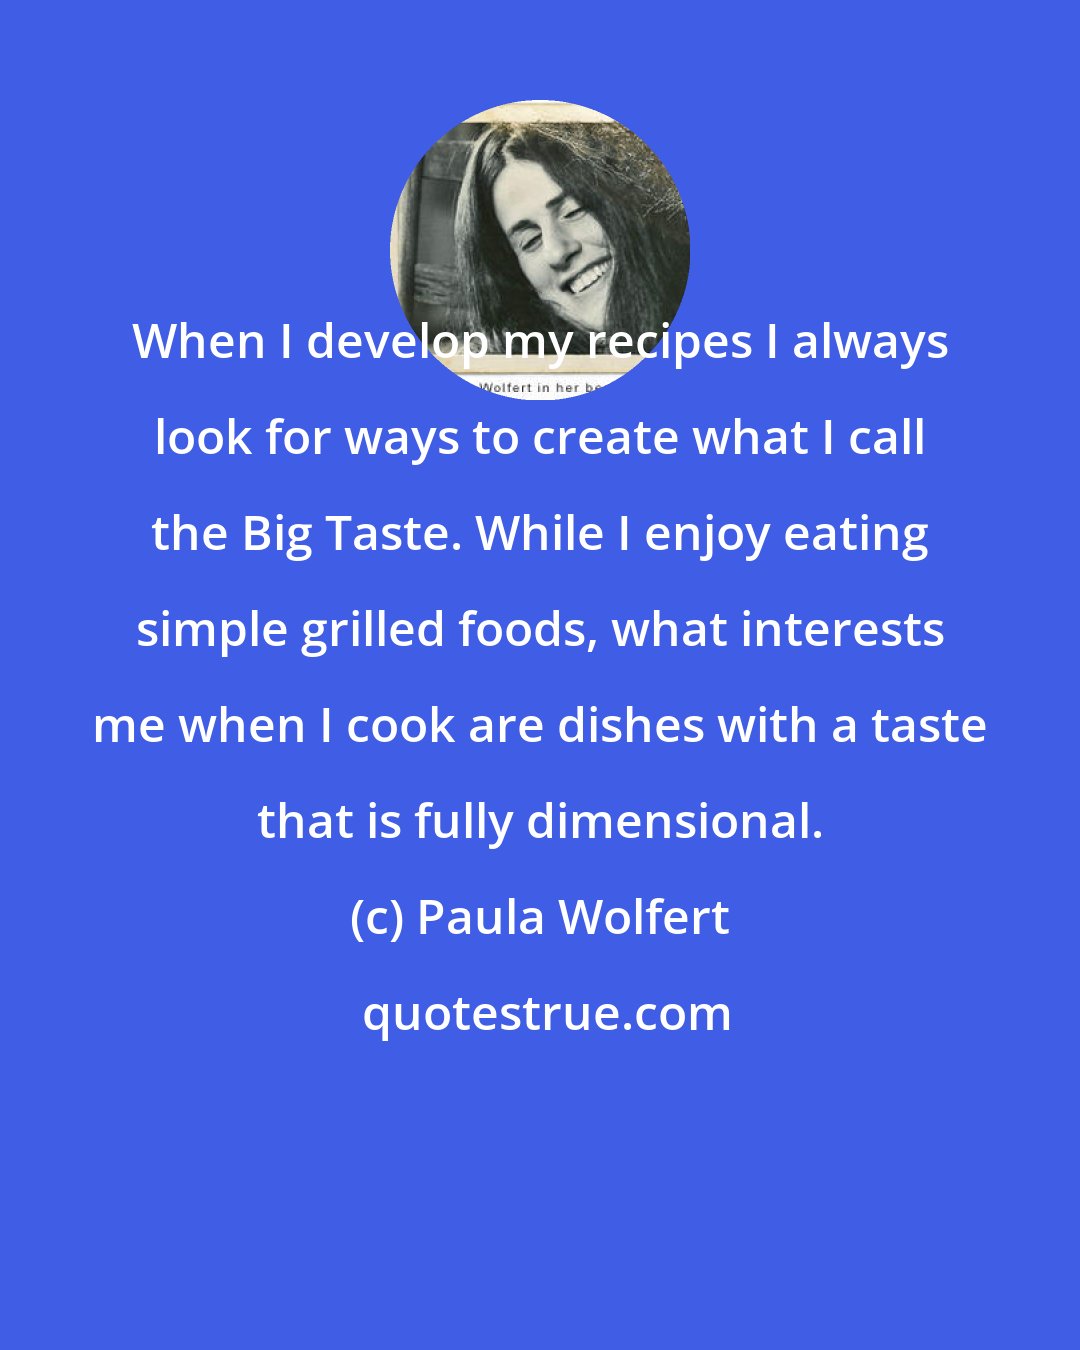 Paula Wolfert: When I develop my recipes I always look for ways to create what I call the Big Taste. While I enjoy eating simple grilled foods, what interests me when I cook are dishes with a taste that is fully dimensional.